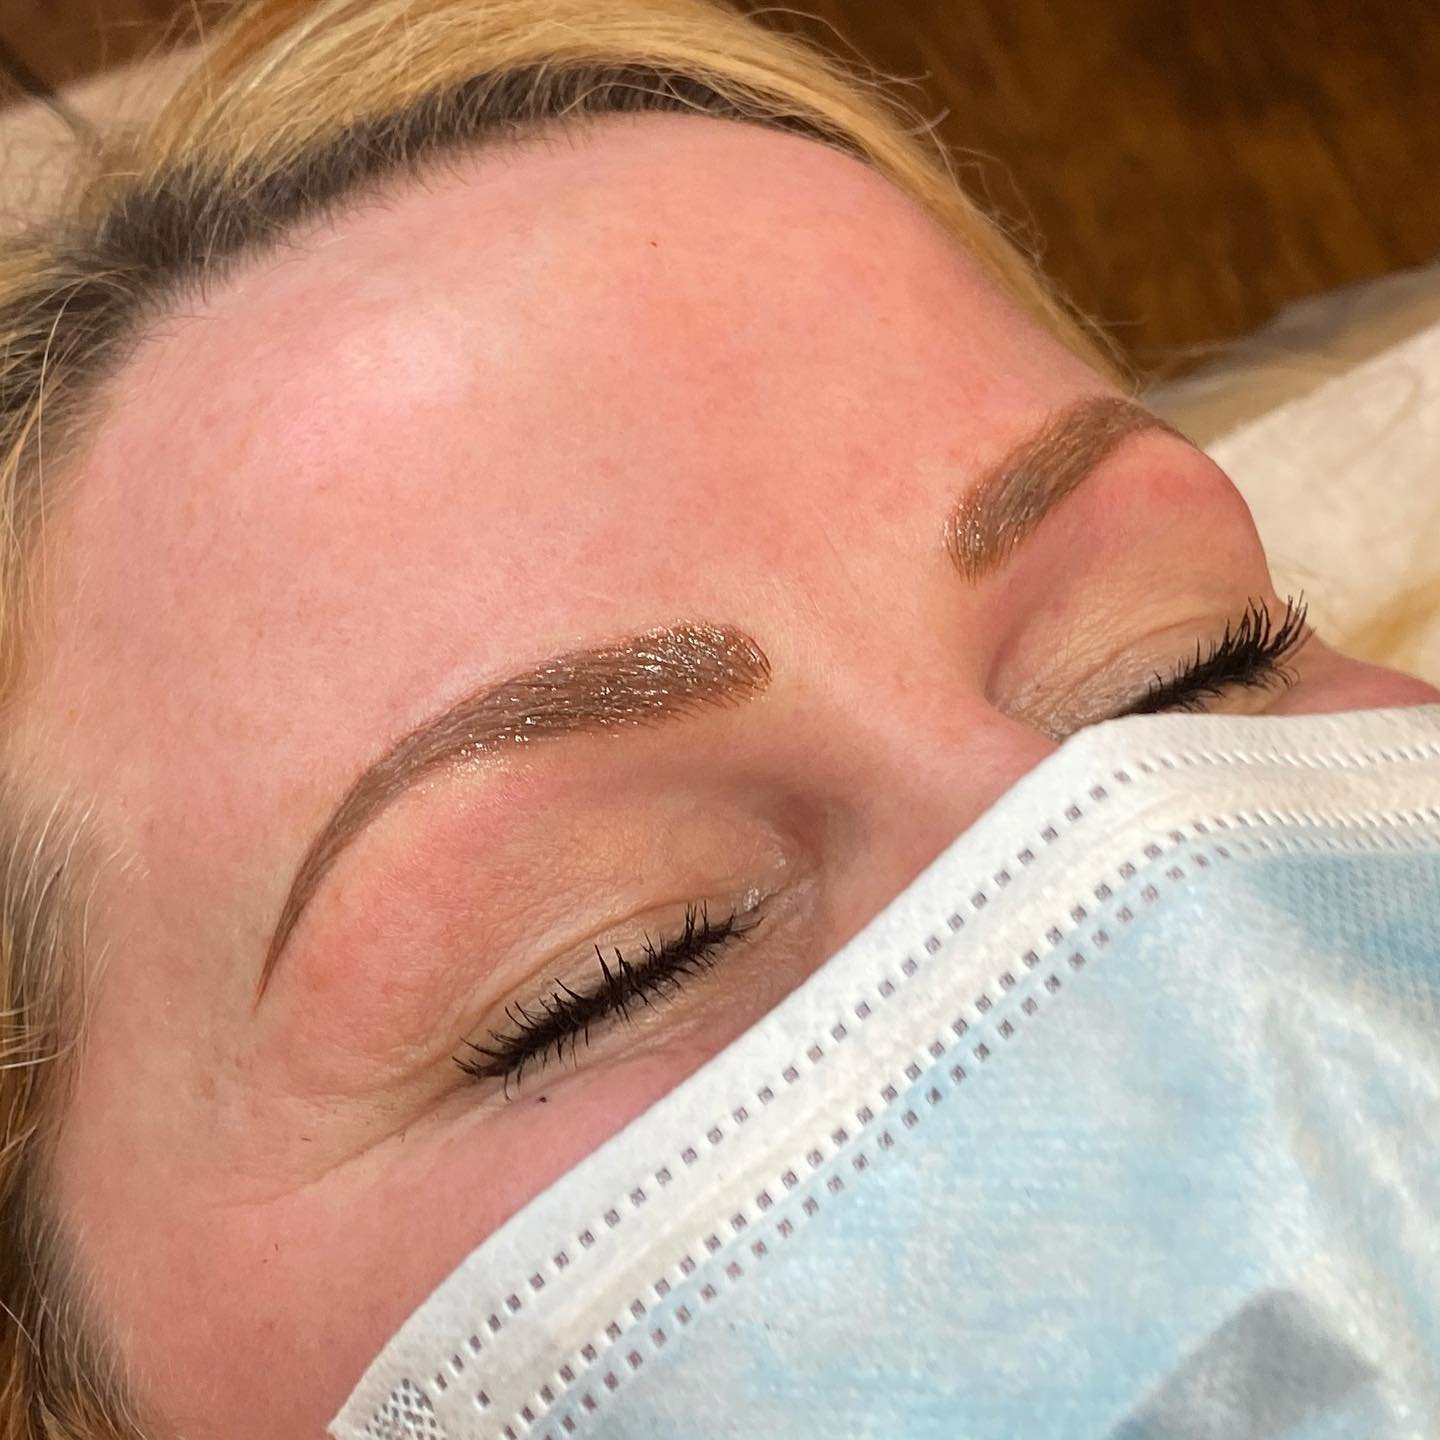 Experimenting with new colours - We love this &ldquo;Rome&rdquo; for a neutral/ashe blonde, just enough warmth to counteract a white skin. #lovemywork #microblading #semipermanentmakeup #jerseyci #beautysalonjerseyci #microbladingjersey